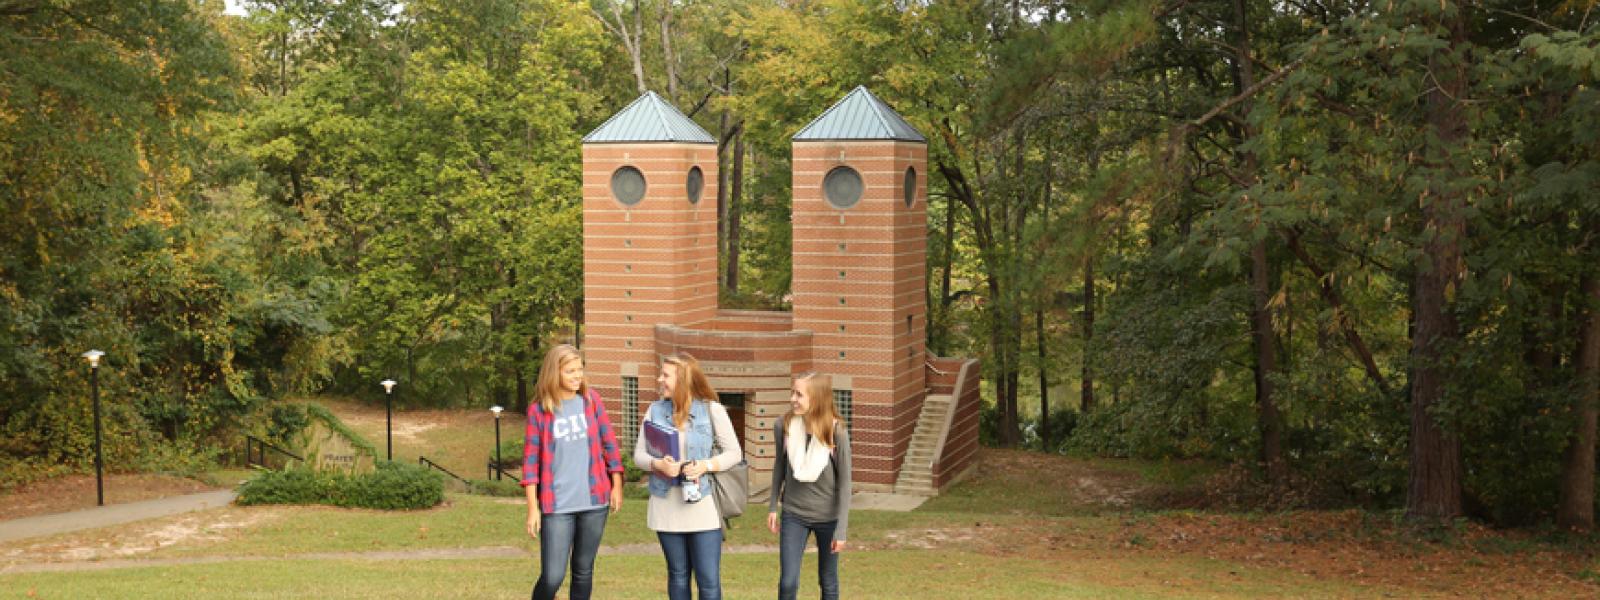 CIU students in front of the prayer towers.